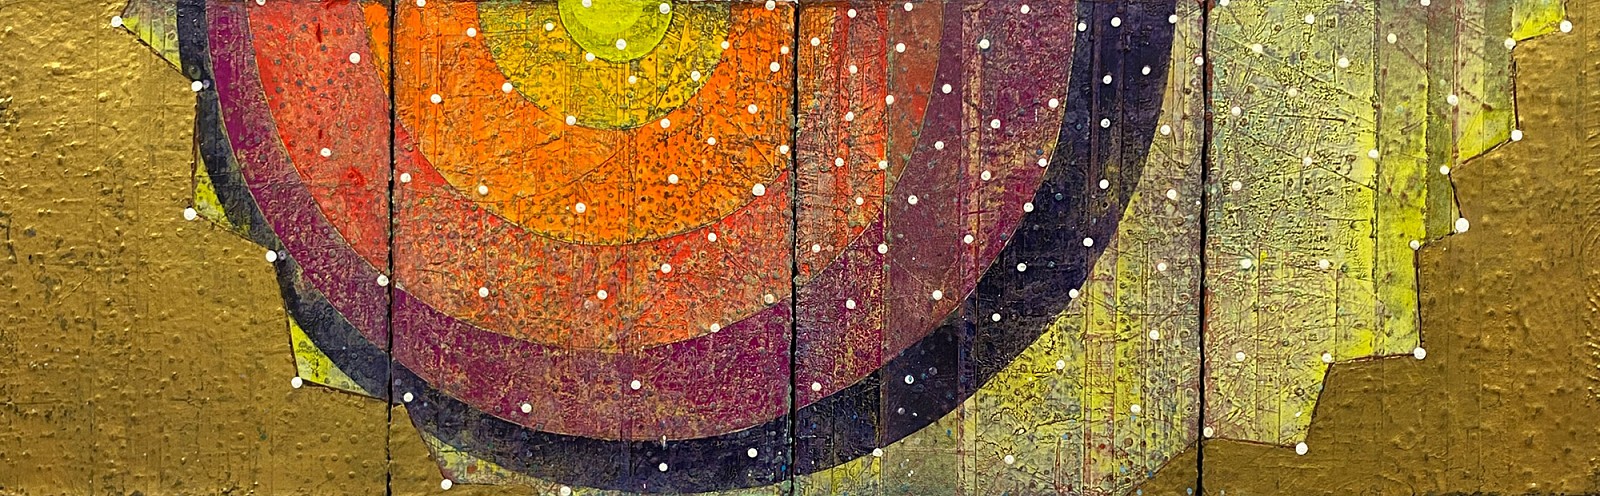 Jason Rohlf, Heliocentric, 2022
Mixed Media on Panel, 20 x 64 in. (50.8 x 162.6 cm)
08422